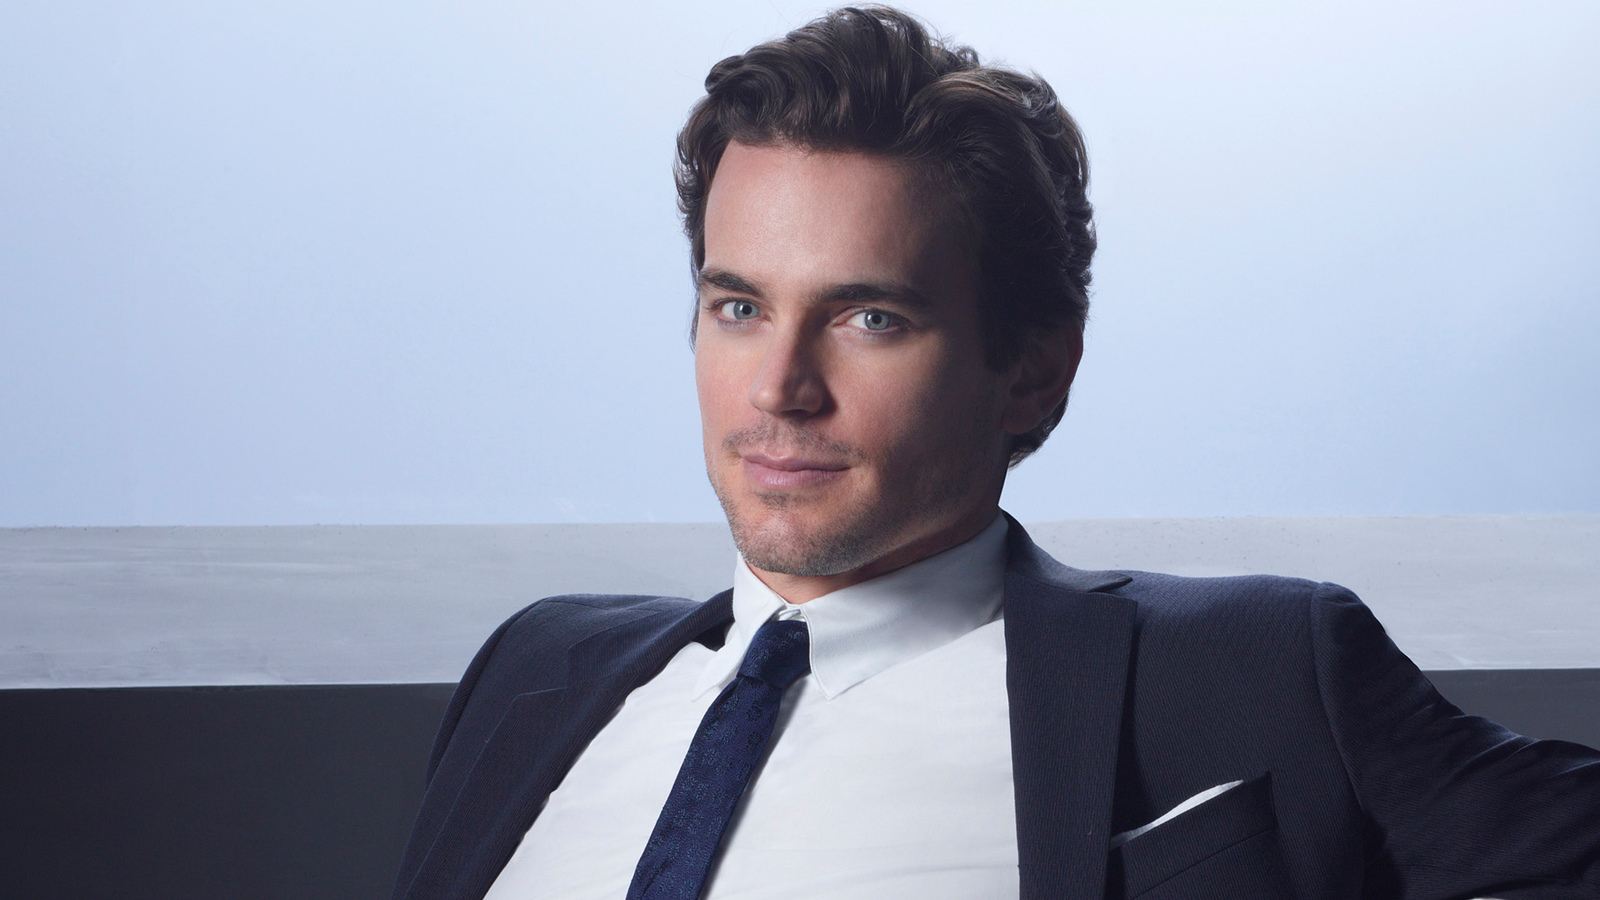 Neal Caffrey's Blonde Hair: A Look at the Iconic Hairstyle - wide 7